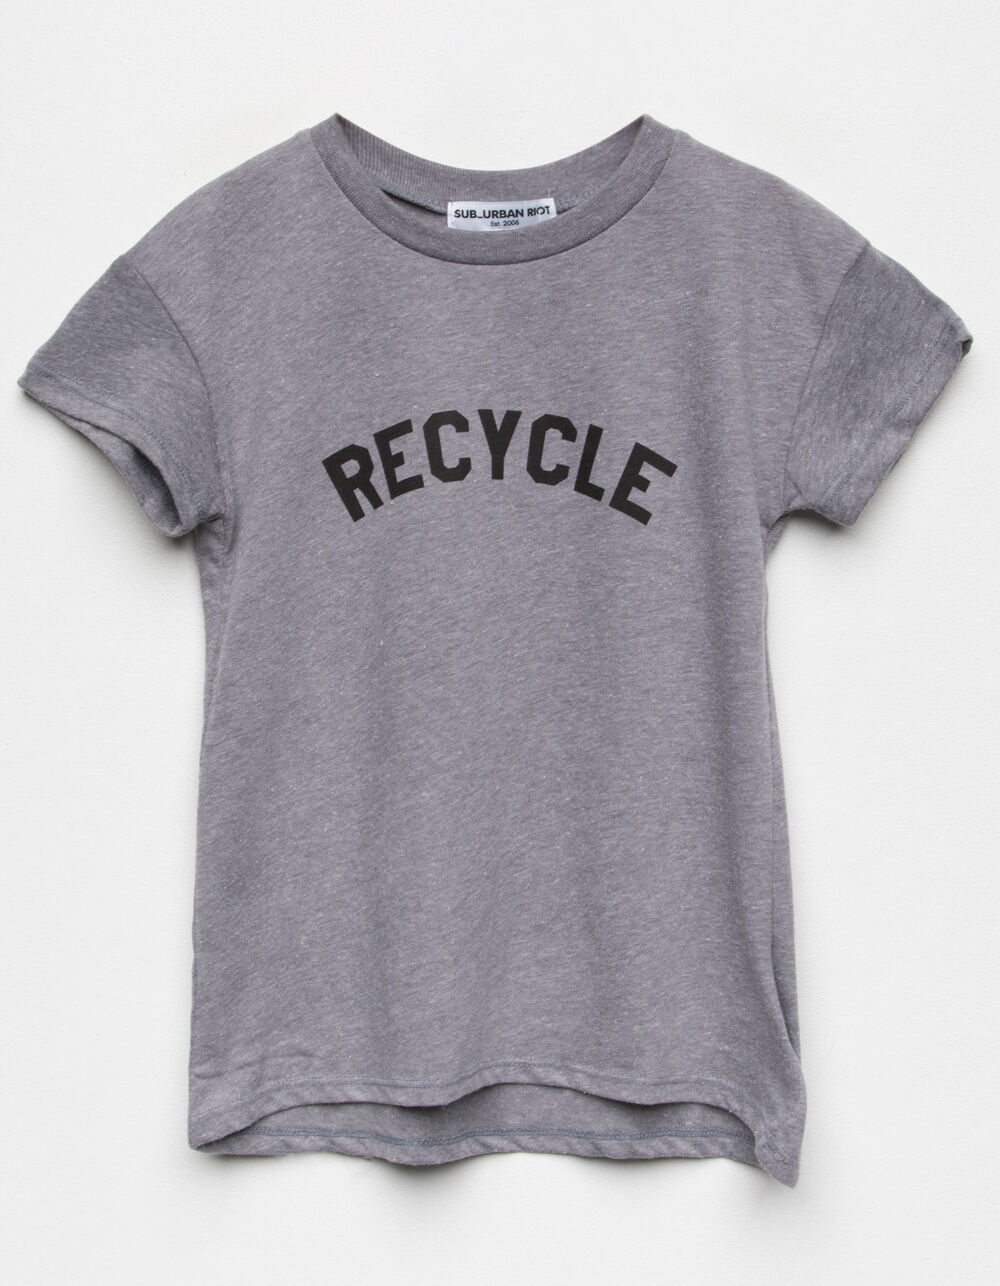 SUB URBAN RIOT Recycle Girls Tee - HEGRY | Tillys